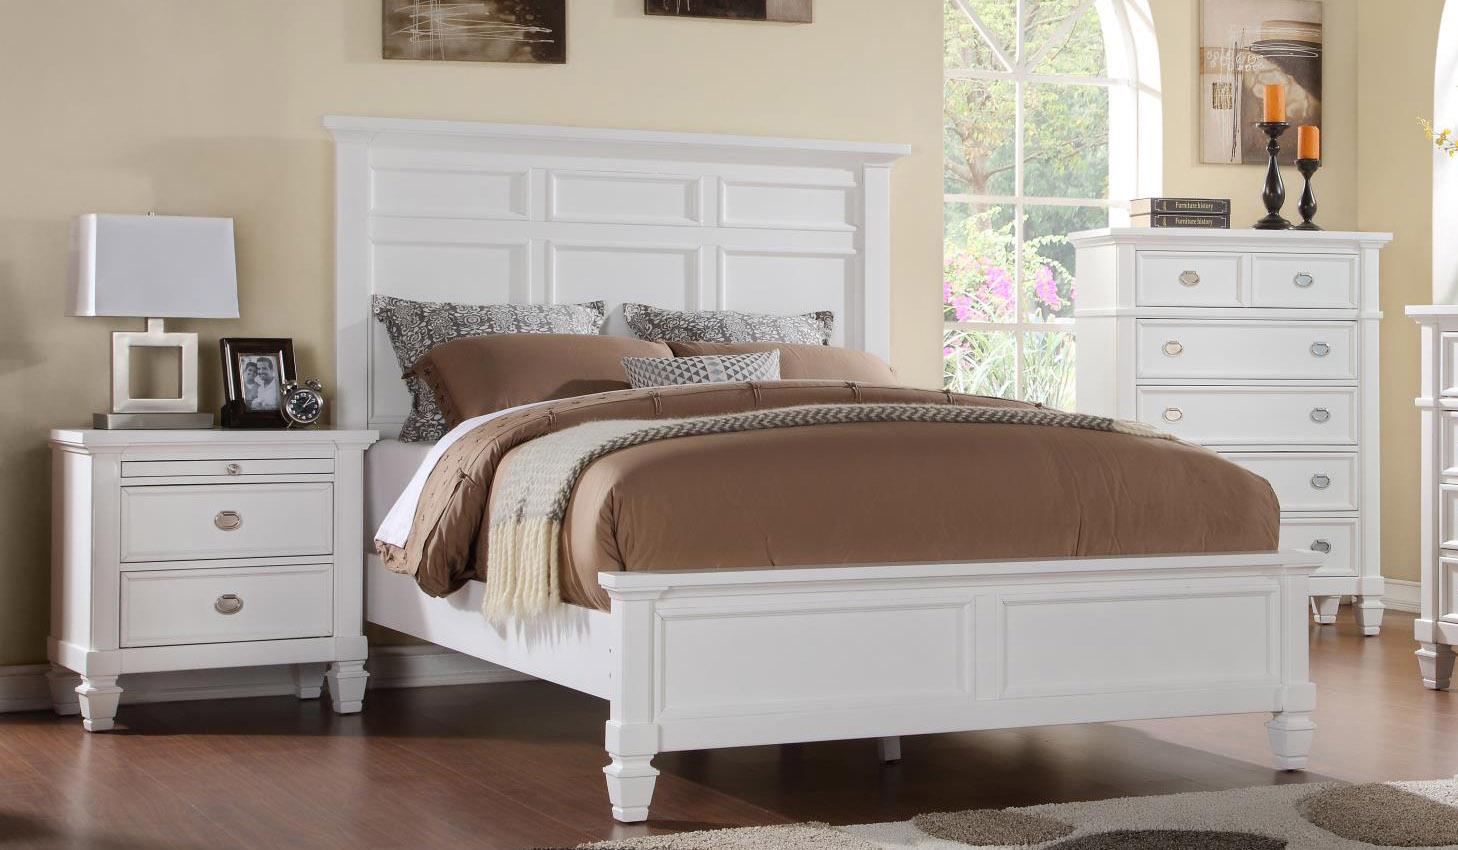 

    
MYCO Furniture DL110Q Dolce White Finish Solid Hardwoods Queen Bed Set 5Pcs Classic
